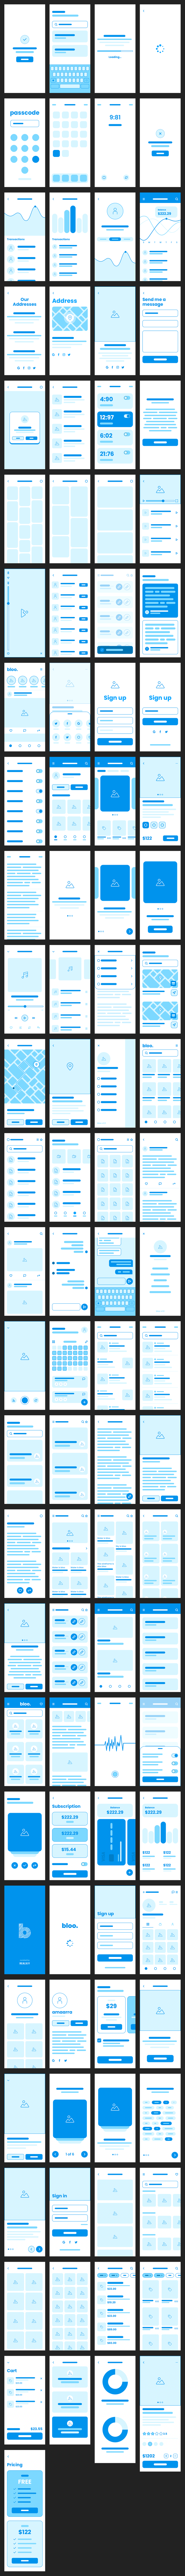 Bloo Free Wireframe UI Kit - All in one open source wireframe kit for quick design and prototyping your idea. Its library contains more than 250+ components supporting darkmode and 150+ ready to use mobile screens .